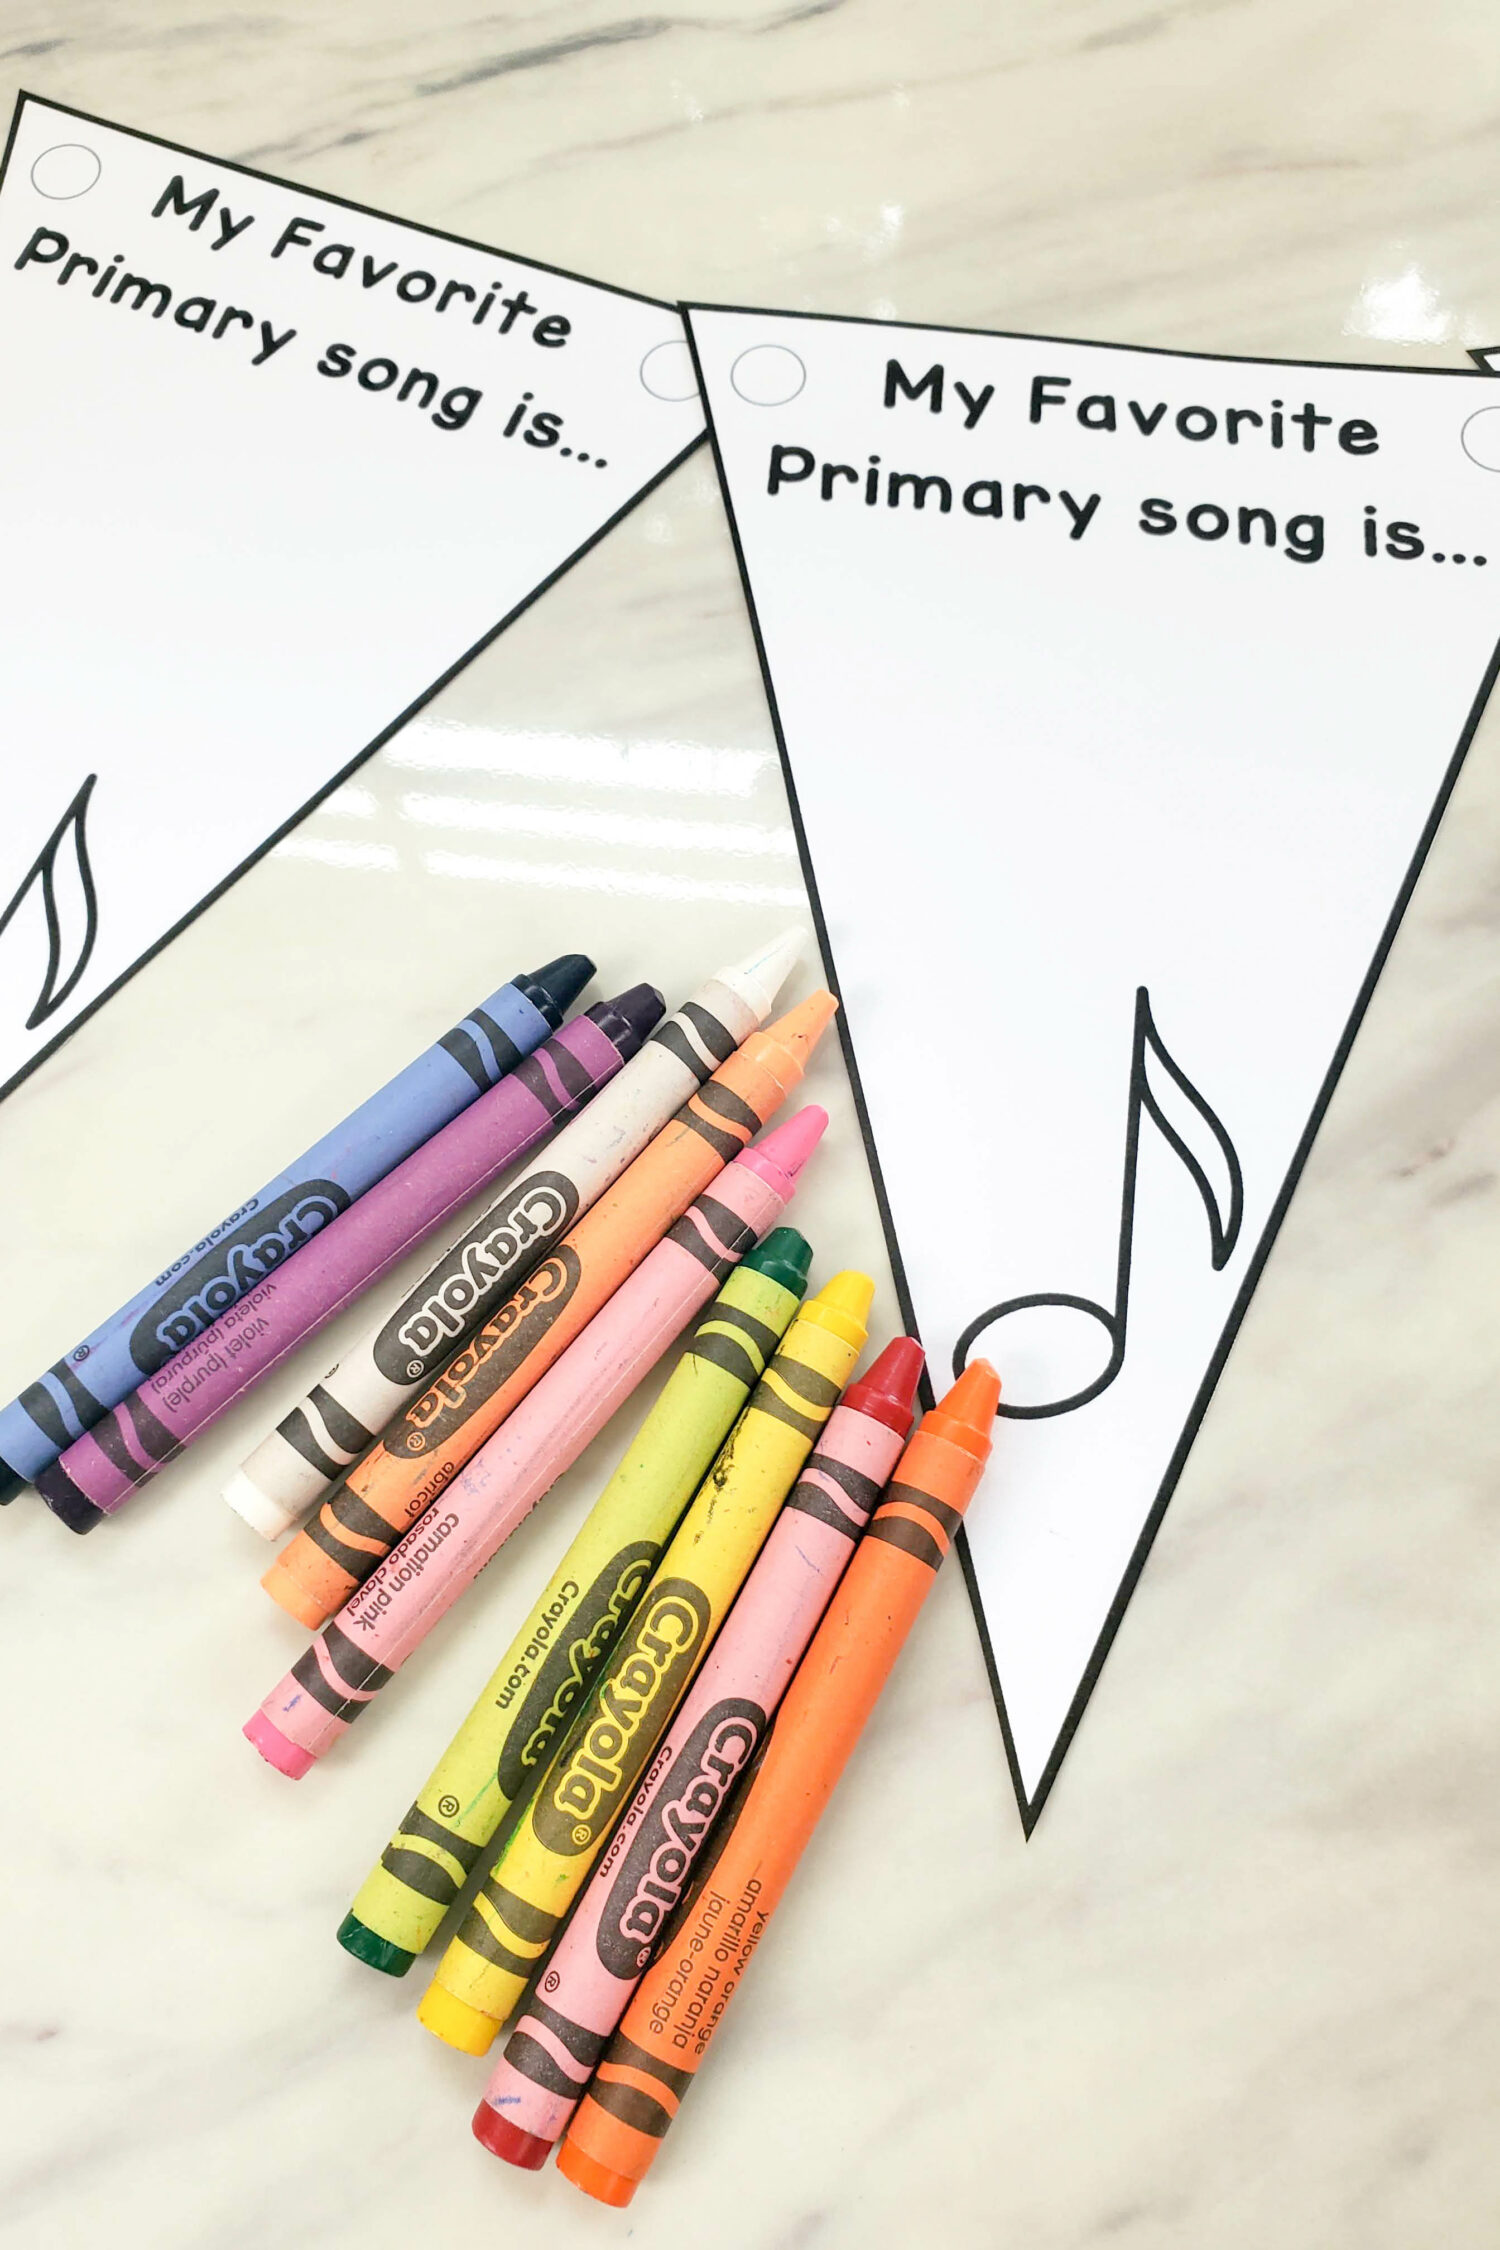 Back to School Primary Pals fun singing time idea. Use it as a get to know you game or to pick your helpers. Make a cute banner to decorate your Primary room!